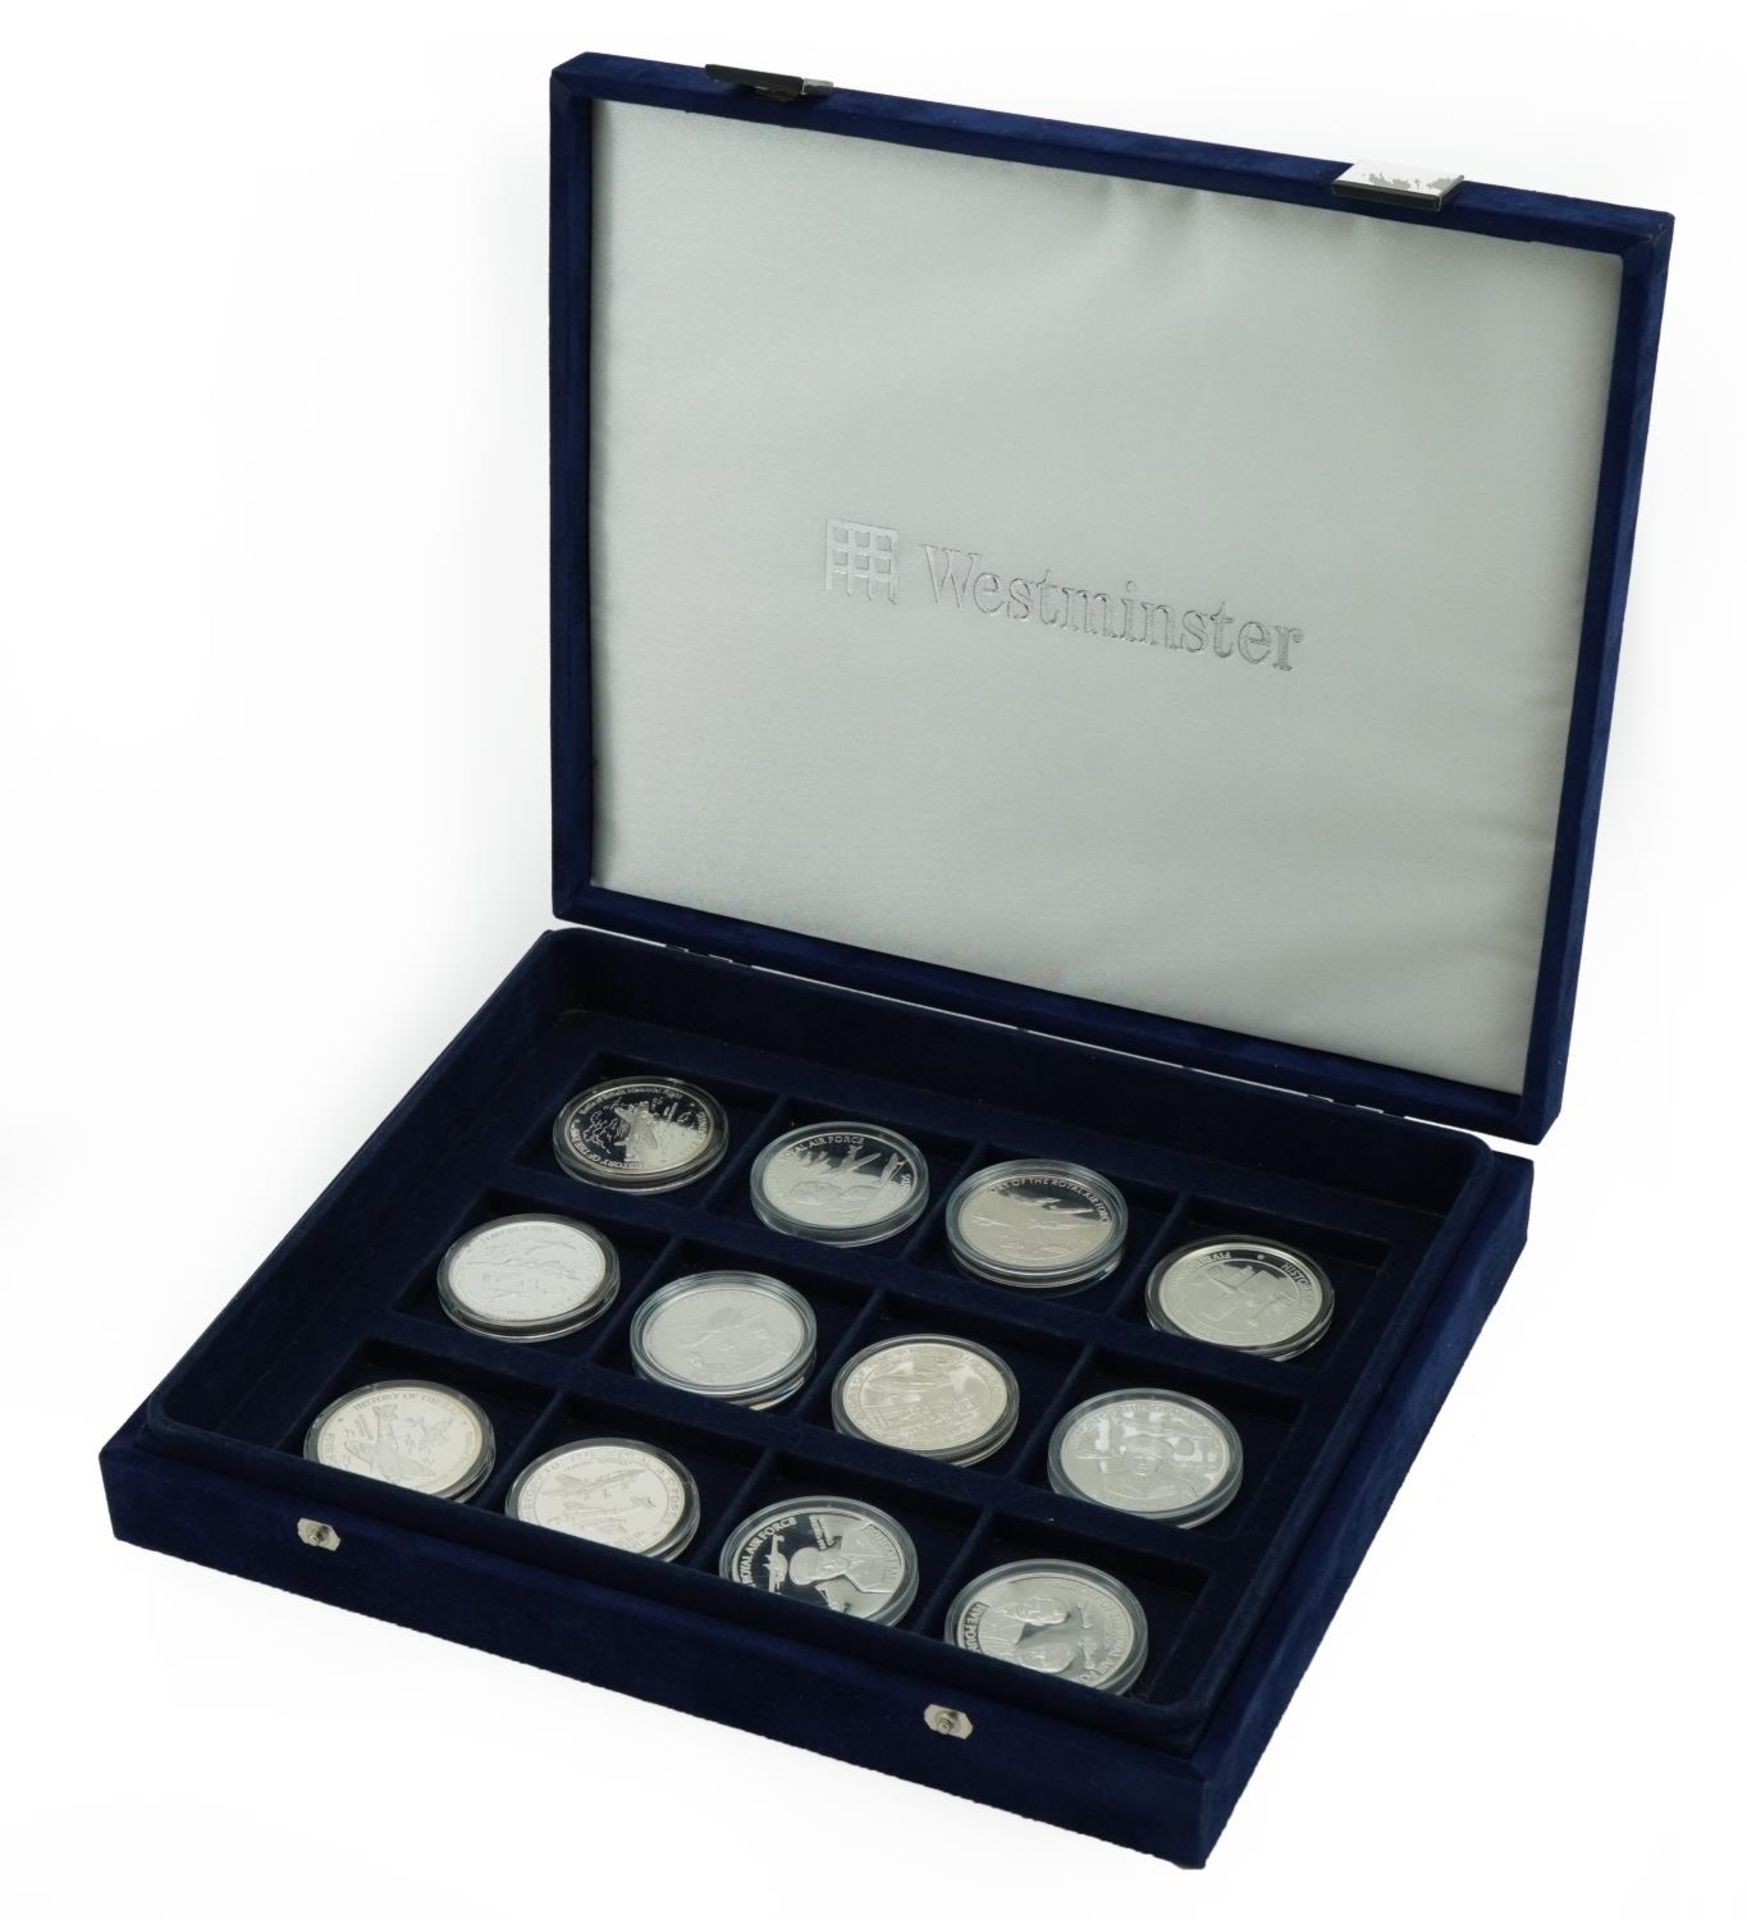 Twelve silver commemorative limited edition History of The RAF five pound coins and five dollar